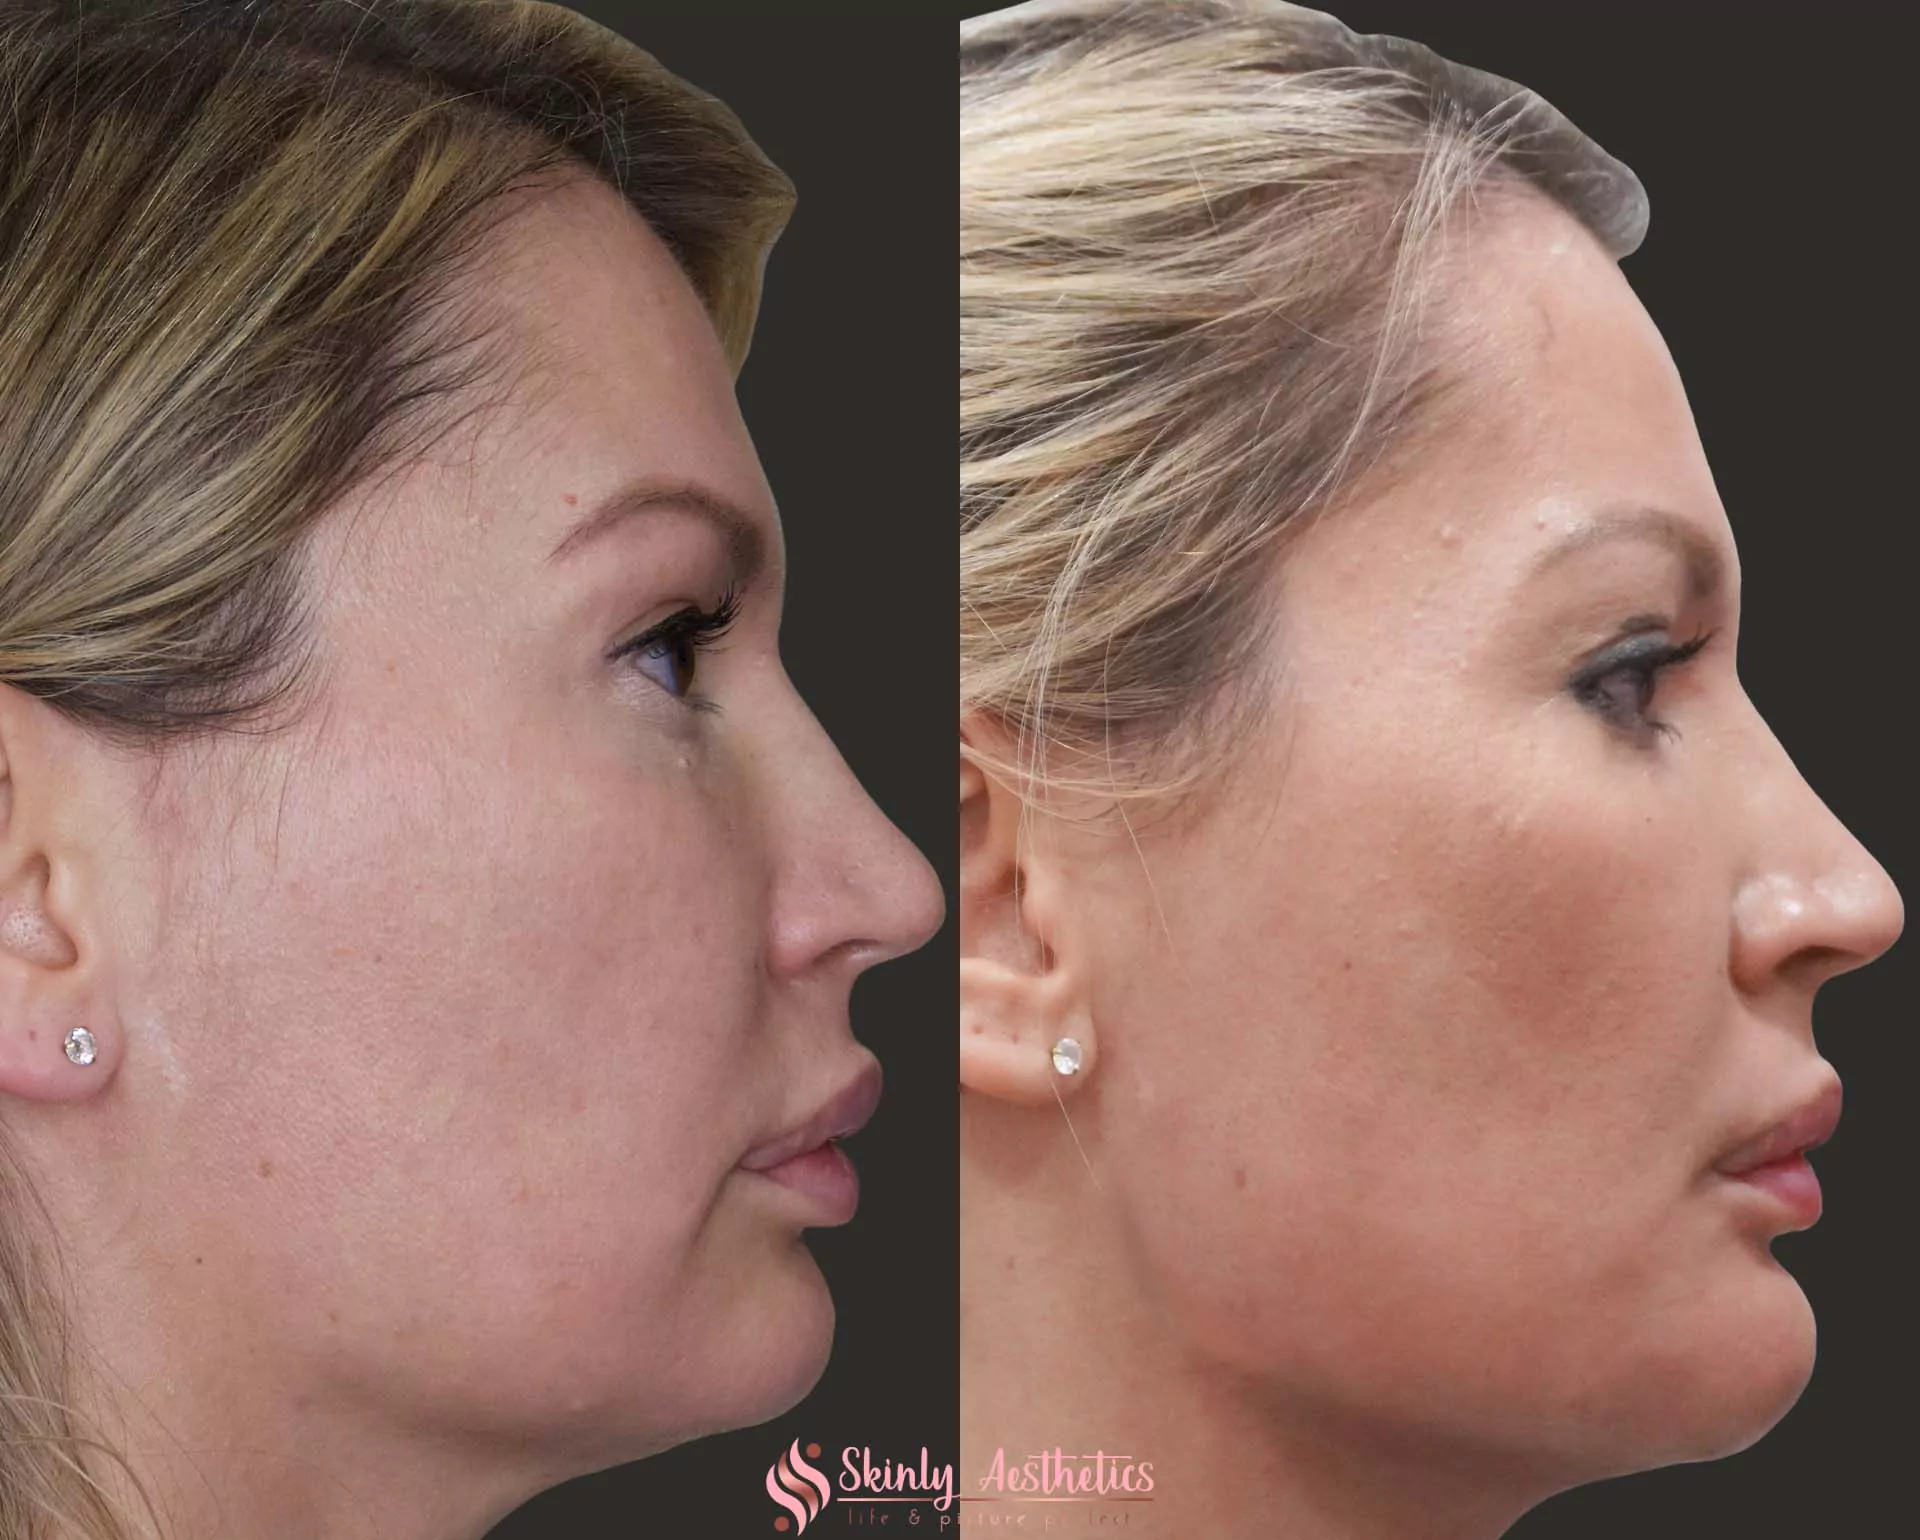 Radiesse injection for jawline sculpting and definition